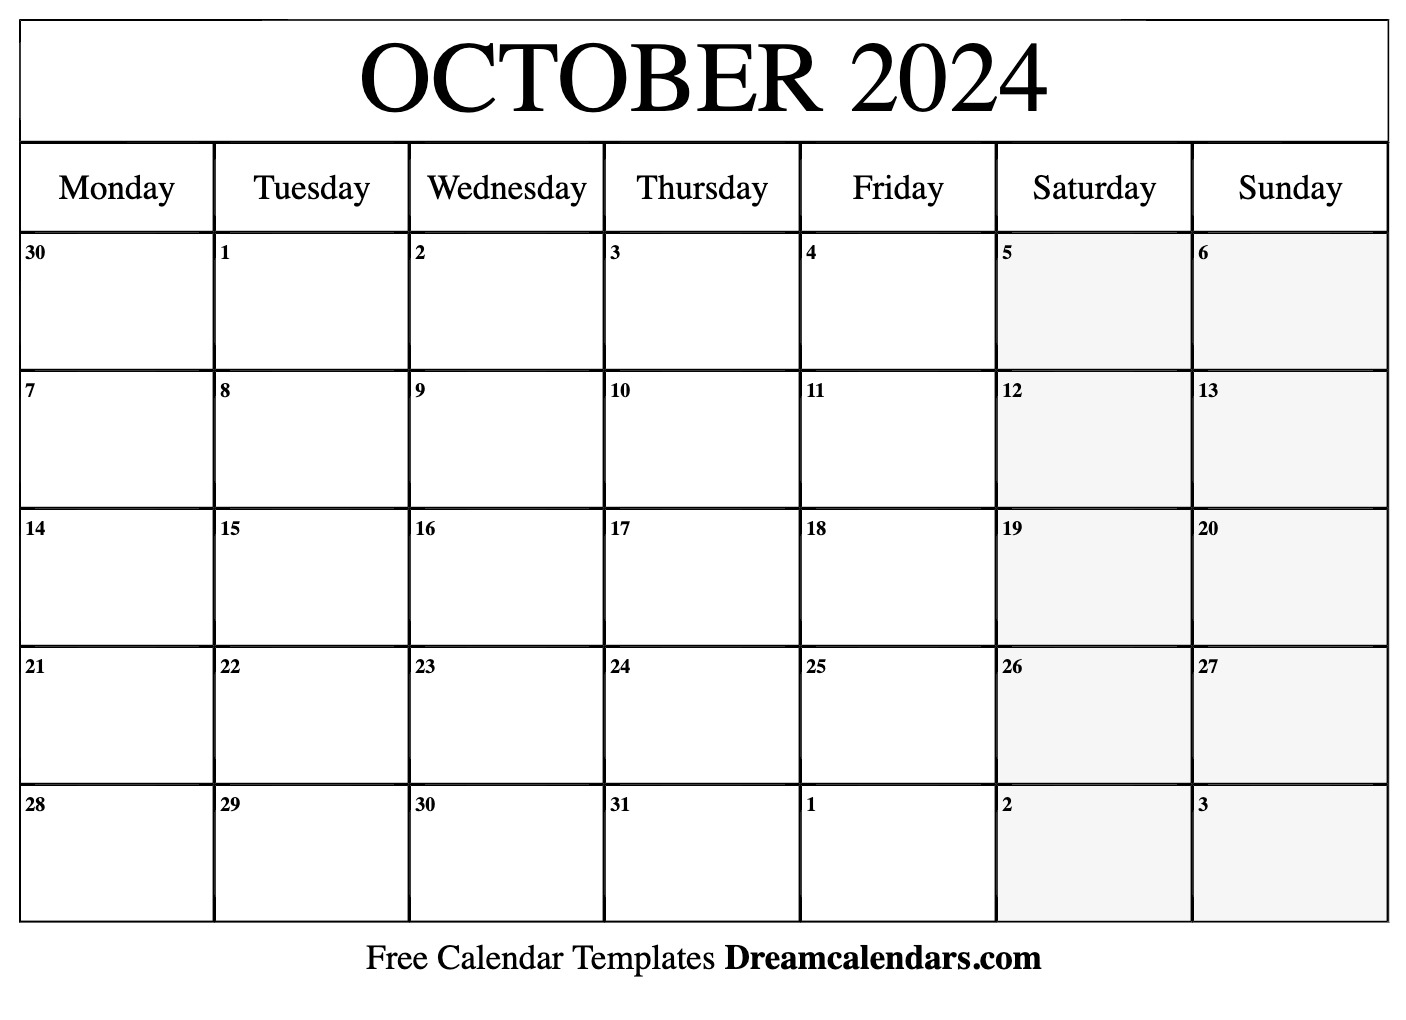 October 2024 Calendar | Free Blank Printable With Holidays for Free Printable October Calendar 2024